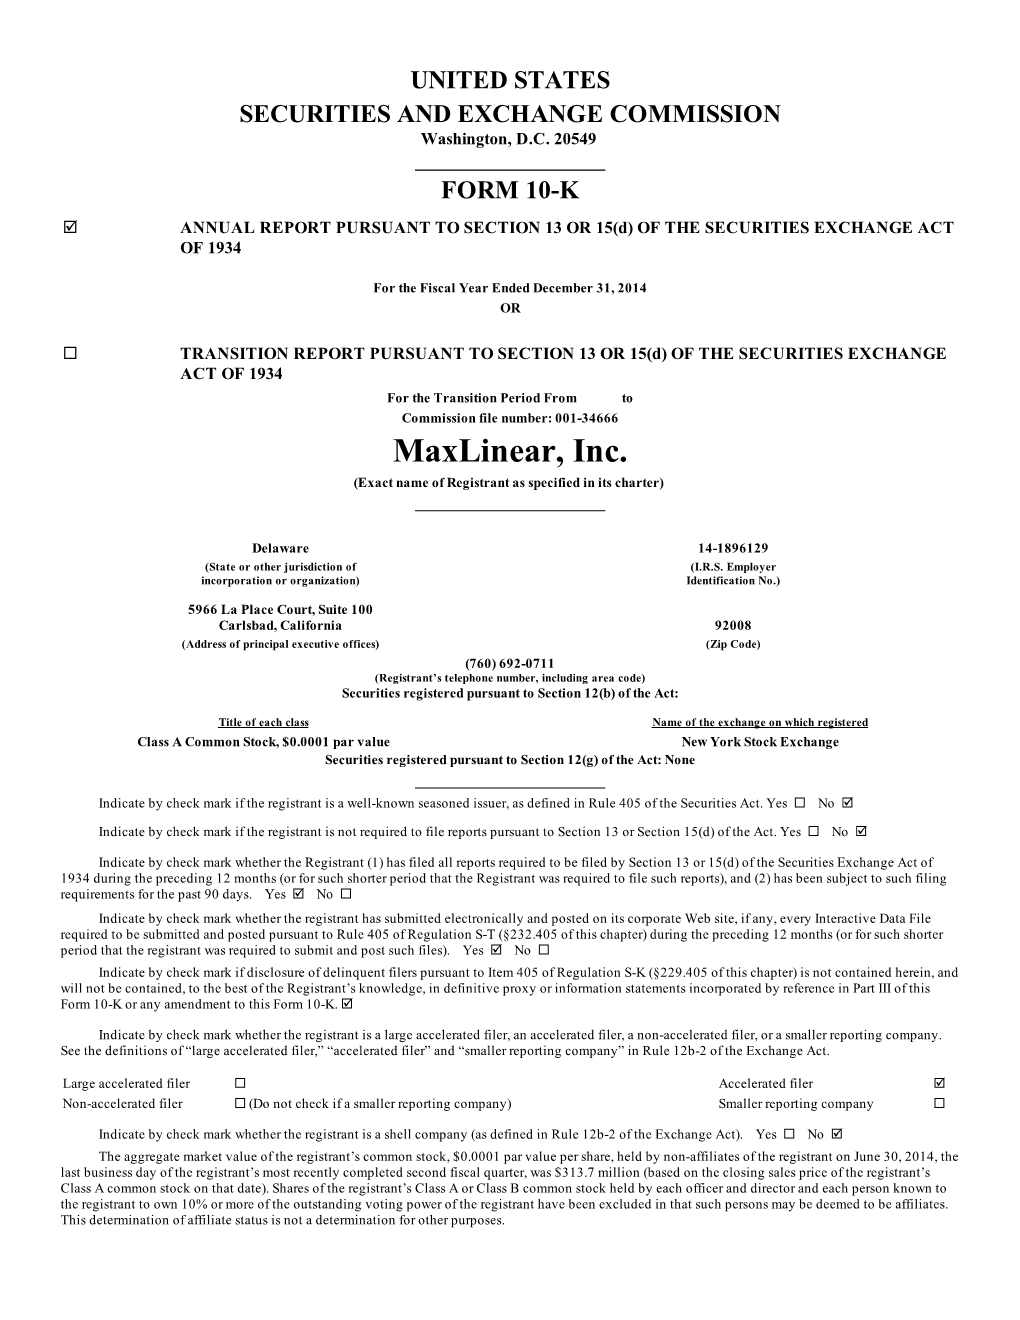 Maxlinear, Inc. (Exact Name of Registrant As Specified in Its Charter)